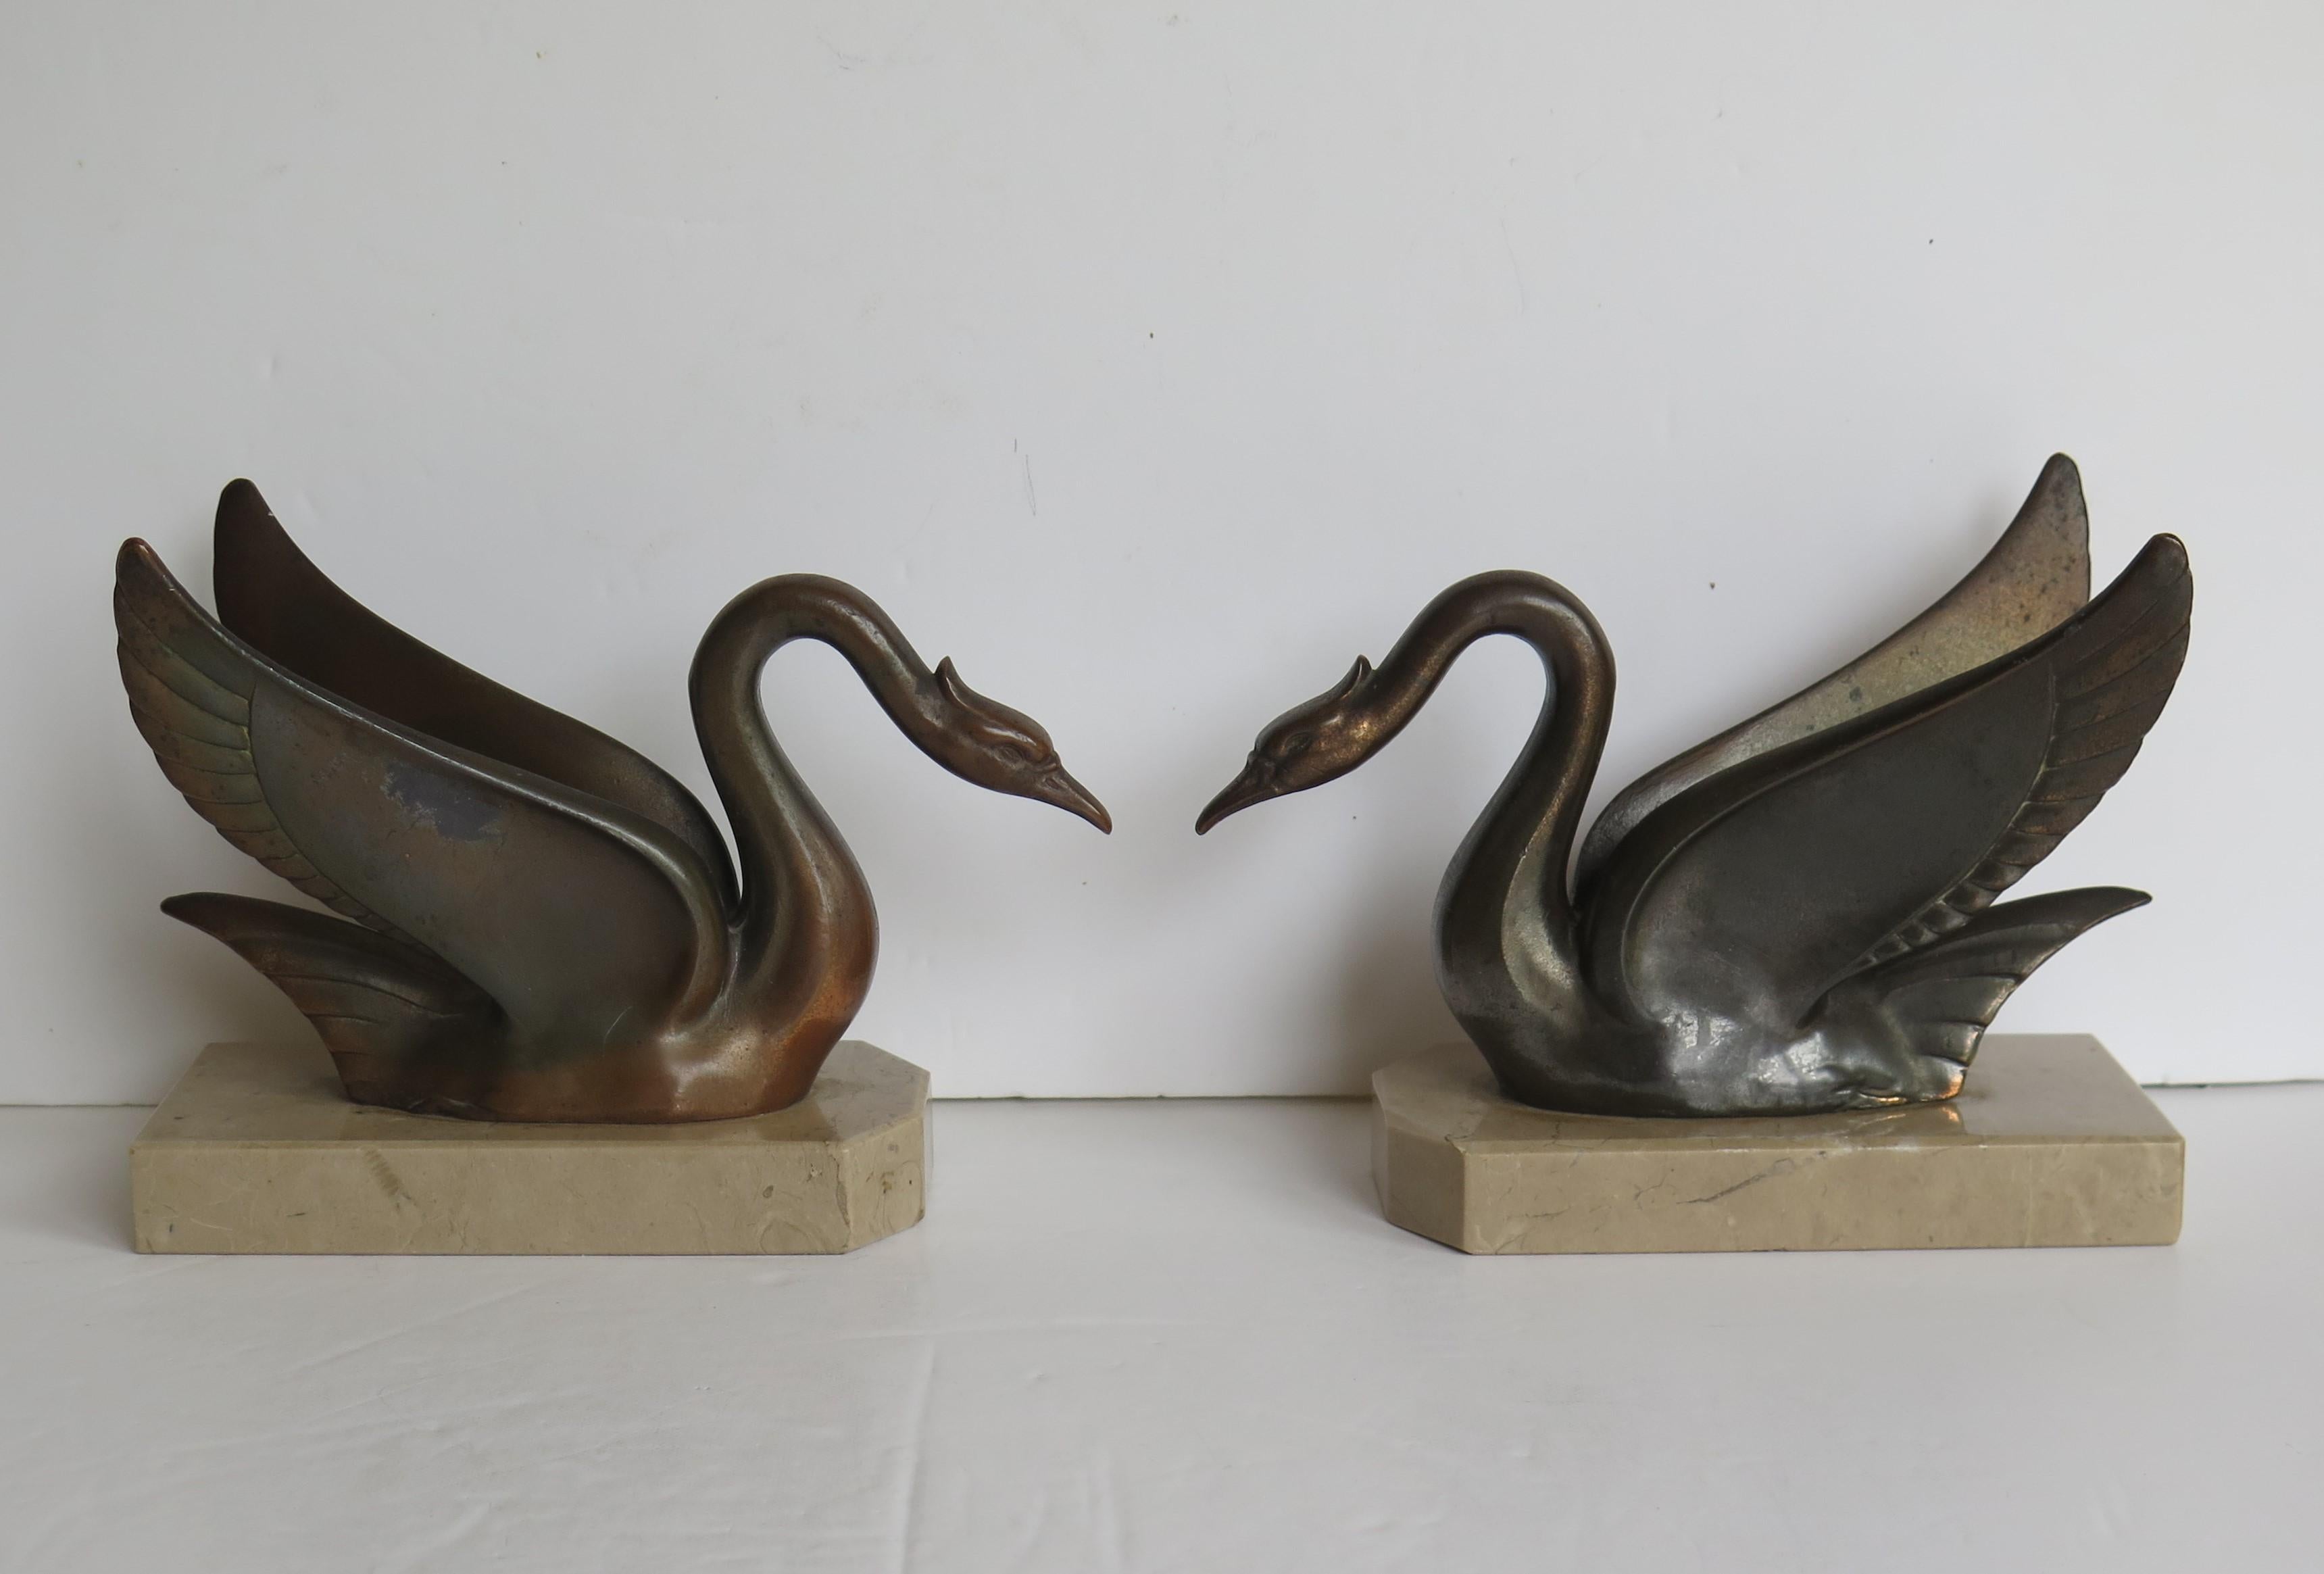 These are a beautiful pair of good quality French, Art Deco period, book ends of two metal bronzed swans on marble bases. 

Each swan has been well modelled with good detail and then cast in a metal, possibly spelter, having a bronzed finish.